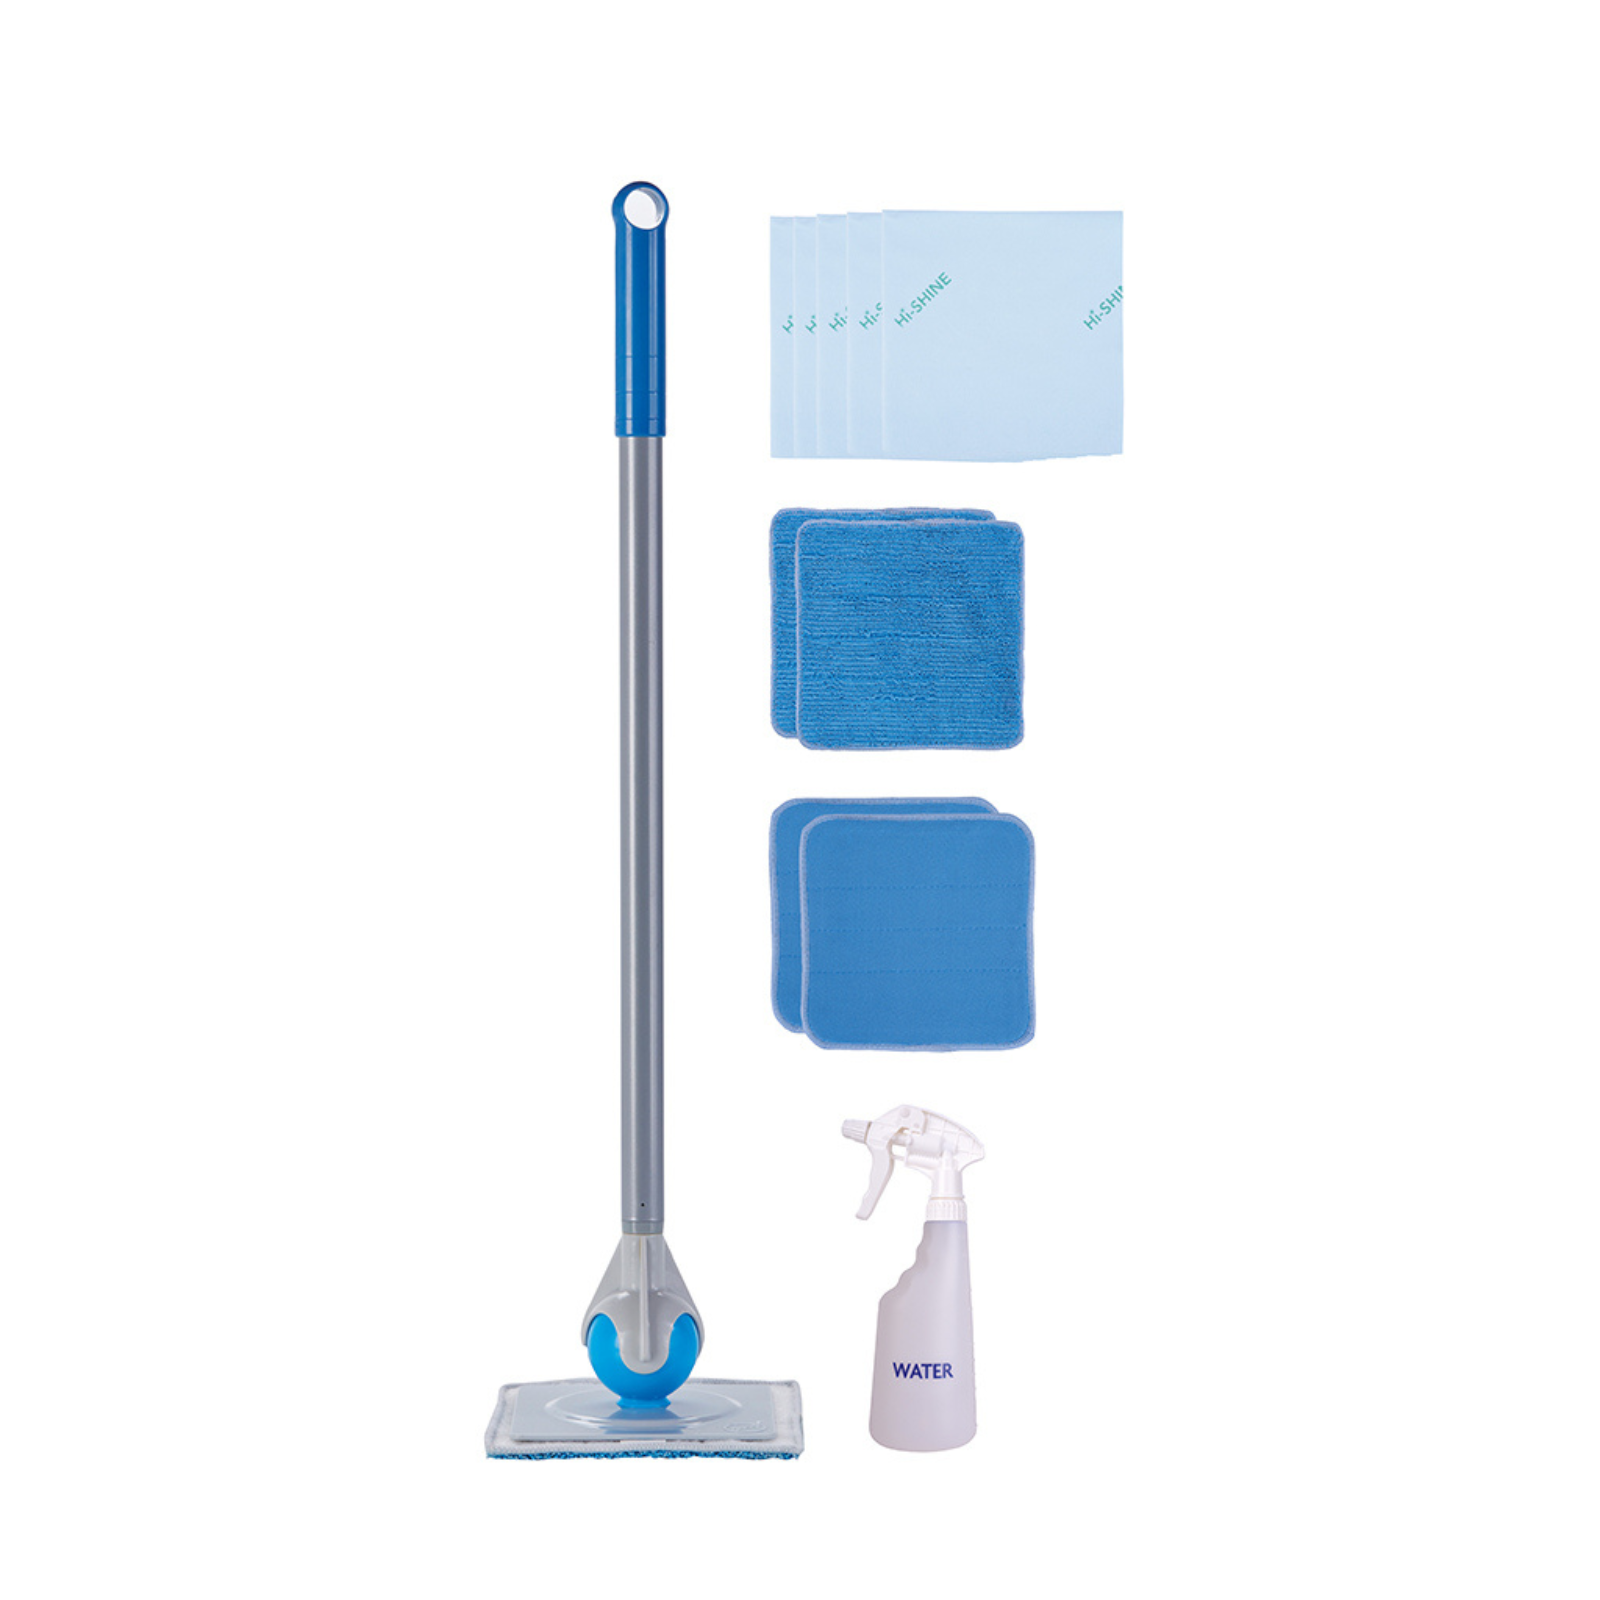 Duop - Cleaning Tool - Reach Kit - 96-162cm